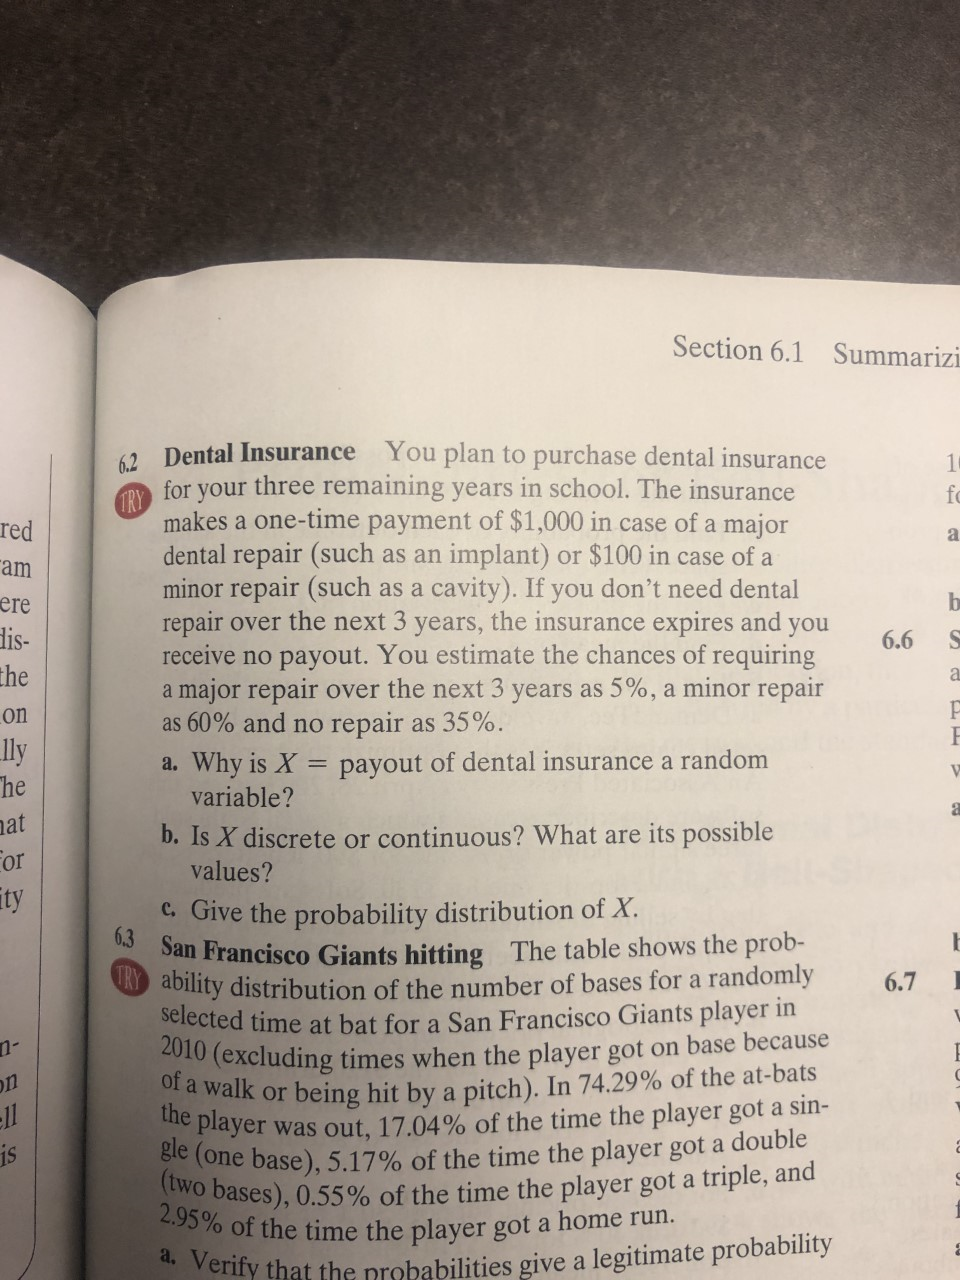 Section 6.1 Summarizi
62 Dental Insurance You plan to purchase dental insurance
for your three remaining years in school. The insurance
1
fo
TRY
makes a one-time payment of $1,000 in case of a major
dental repair (such as an implant) or $100 in case of a
minor repair (such as a cavity). If you don't need dental
repair over the next 3 years, the insurance expires and you
receive no payout. You estimate the chances of requiring
a major repair over the next 3 years as 5%, a minor repair
as 60% and no repair as 35%.
red
a
am
b
ere
dis-
the
6.6
on
ly
he
a. Why is X = payout of dental insurancea random
variable?
at
b. Is X discrete or continuous? What are its possible
values?
For
ty
c.Give the probability distribution of X
6.3 San Francisco Giants hitting The table shows the prob-
ability distribution of the number of bases for a randomly
selected time at bat for a San Francisco Giants player in
2010 (excluding times when the player got on base because
of a walk or being hit by a pitch). In 74.29% of the at-bats
6.7
on
was out, 17.04% of the time the player got a sin-
gle (one base), 5.17% of the time the player got a double
(two bases), 0.55 % of the time the player got a triple, and
2.95% of the time the player got a home run.
the player
ll
is
d Verify that the probabilities give a legitimate probability
